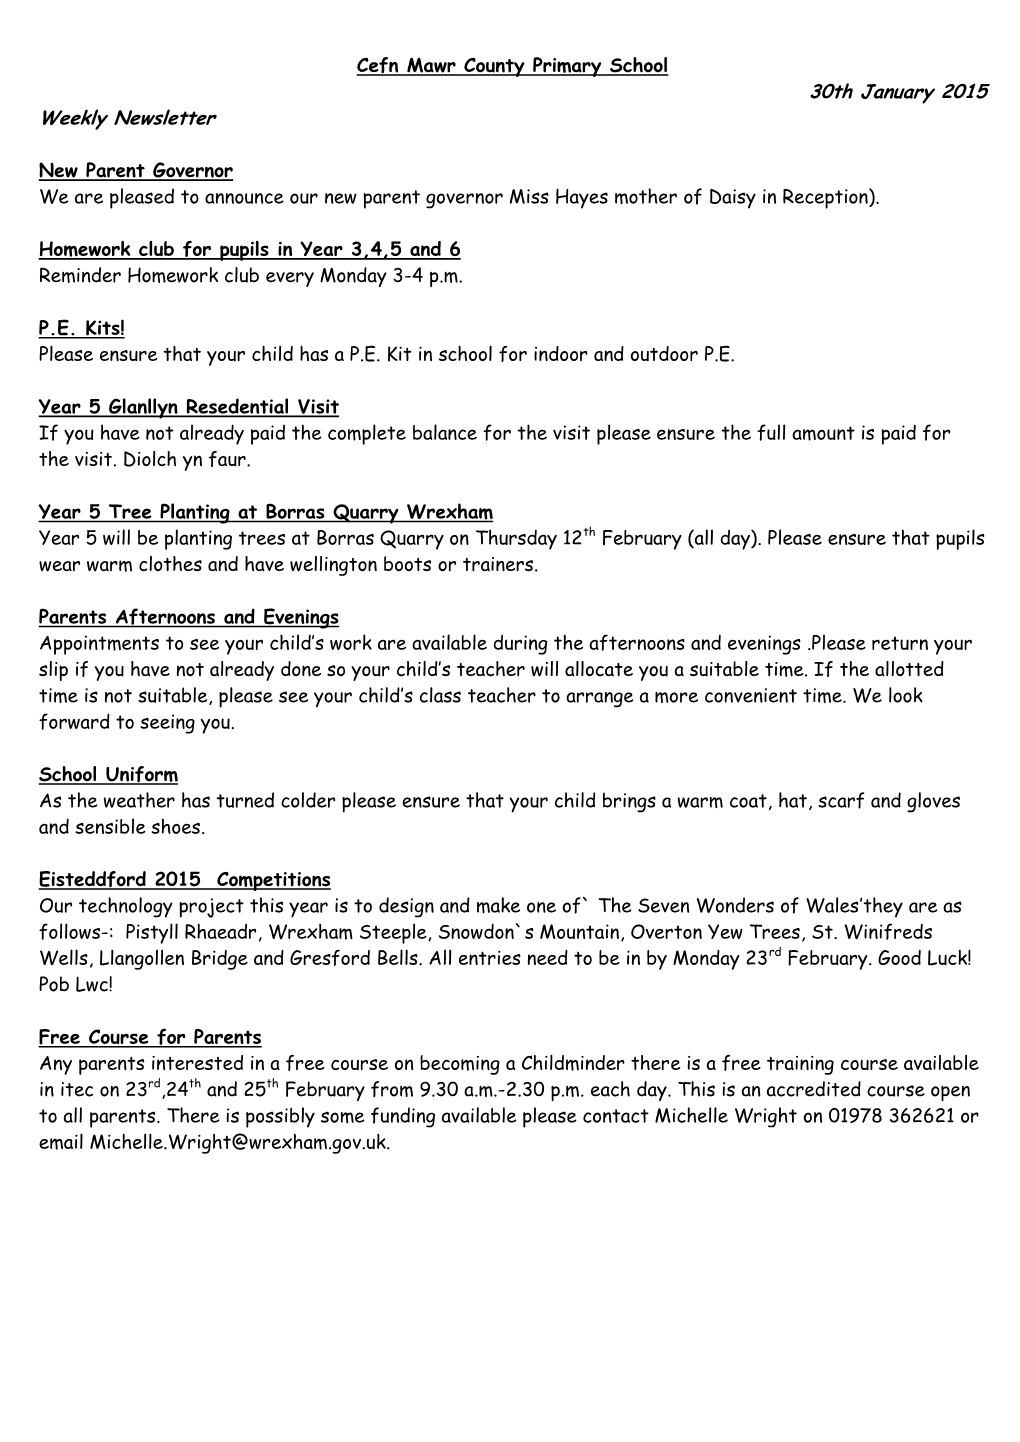 Cefn Mawr County Primary School 30Th January 2015 Weekly Newsletter